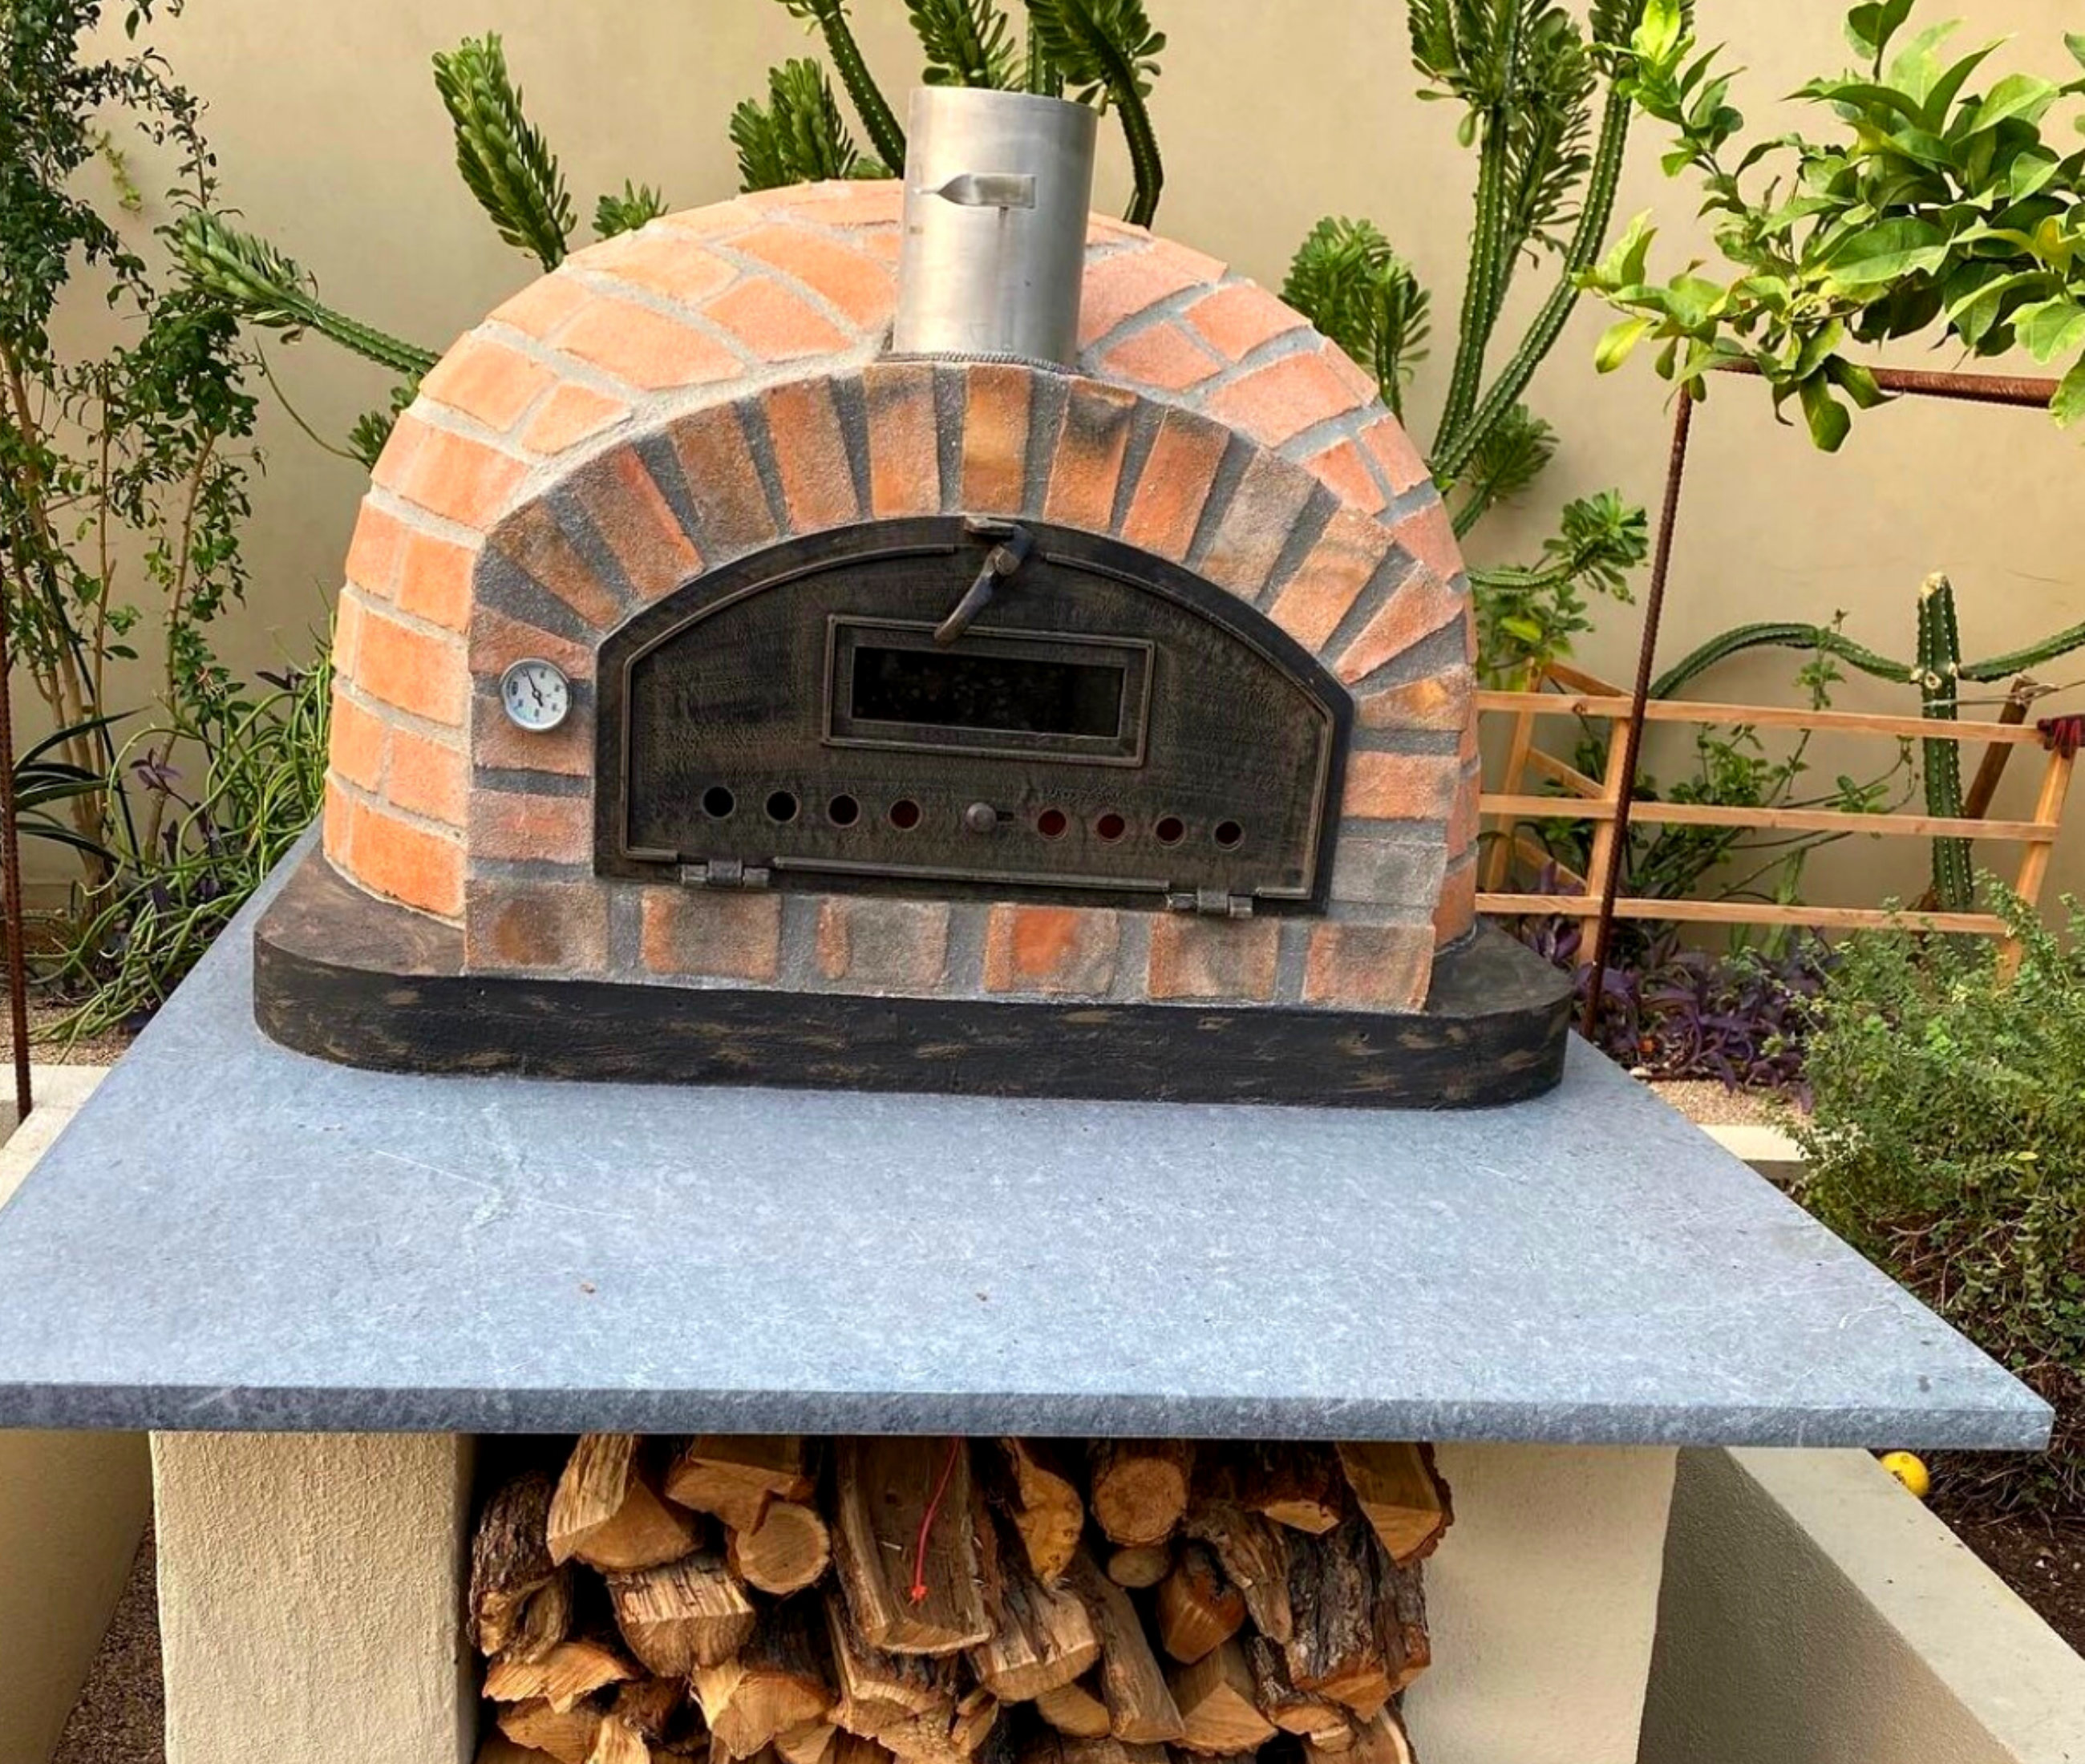 Asser Nationaal volkslied slaaf Authentic Pizza Ovens Pizzaioli Rustic Traditional Pizza Oven | Wayfair